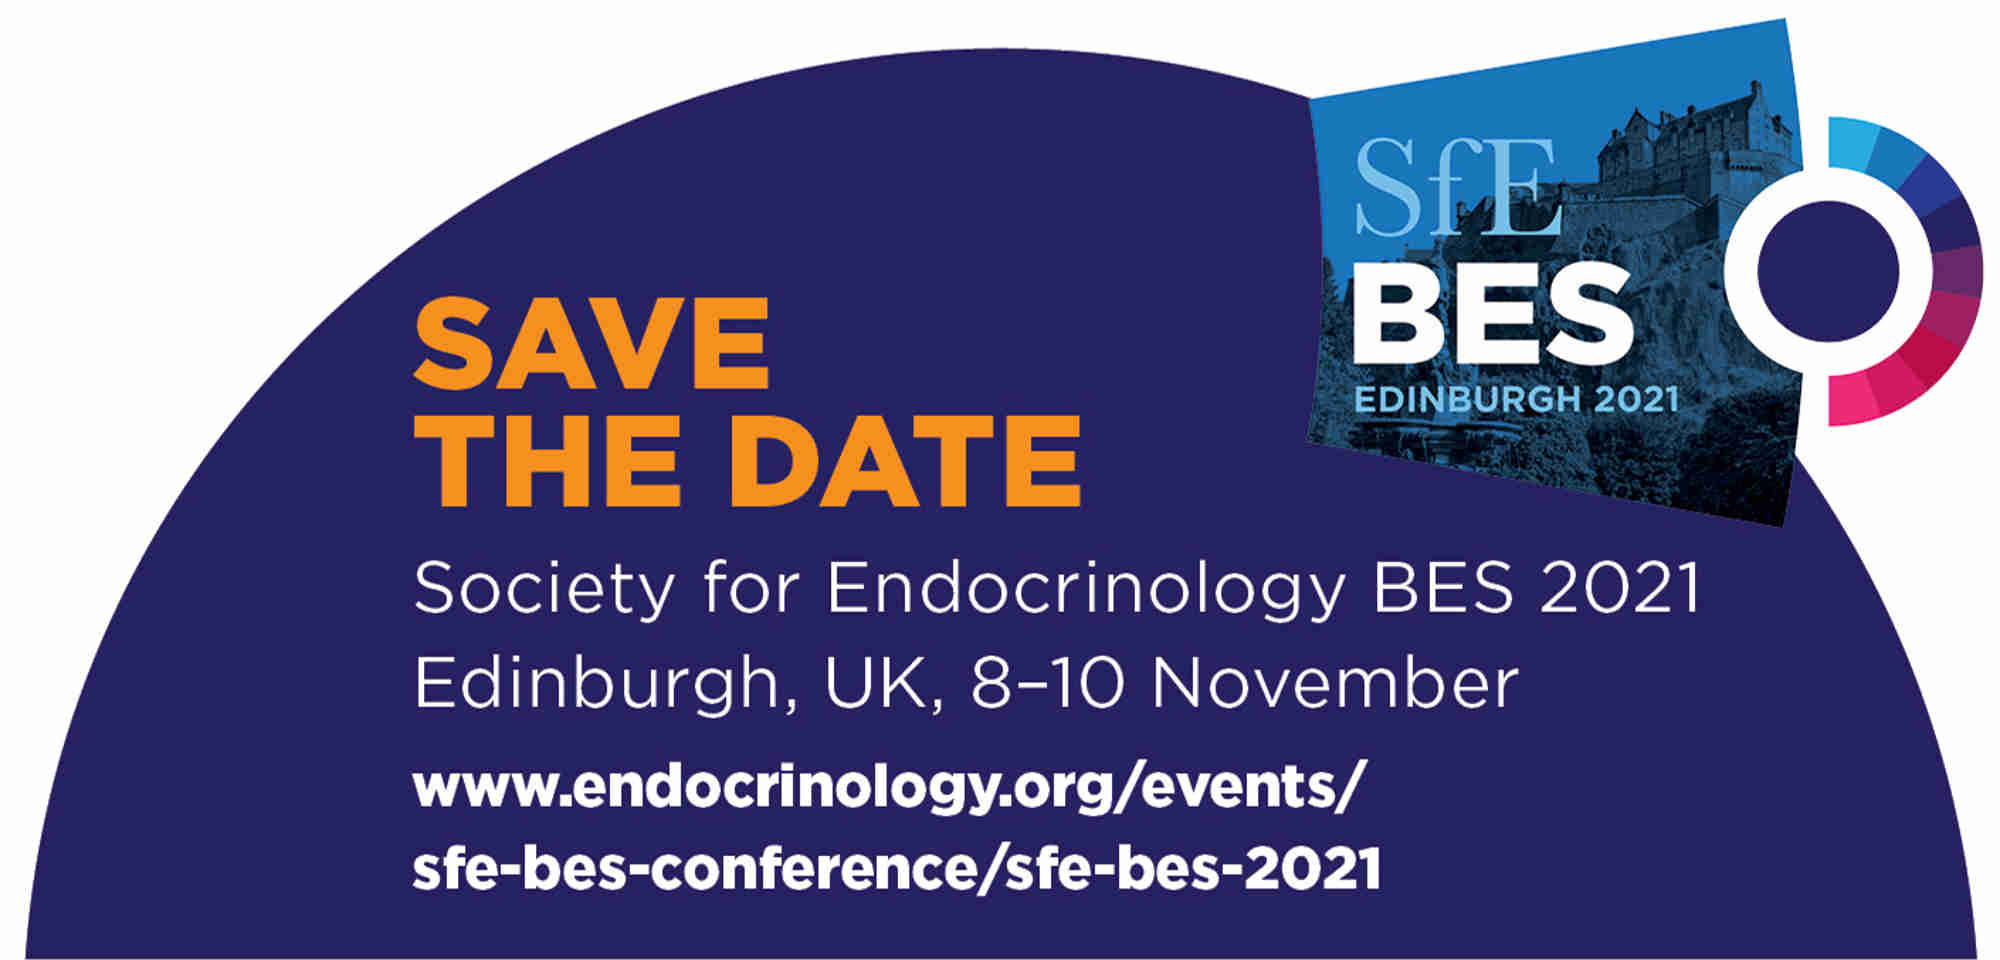 Endocrinologist 138 27-Save the Date.jpg